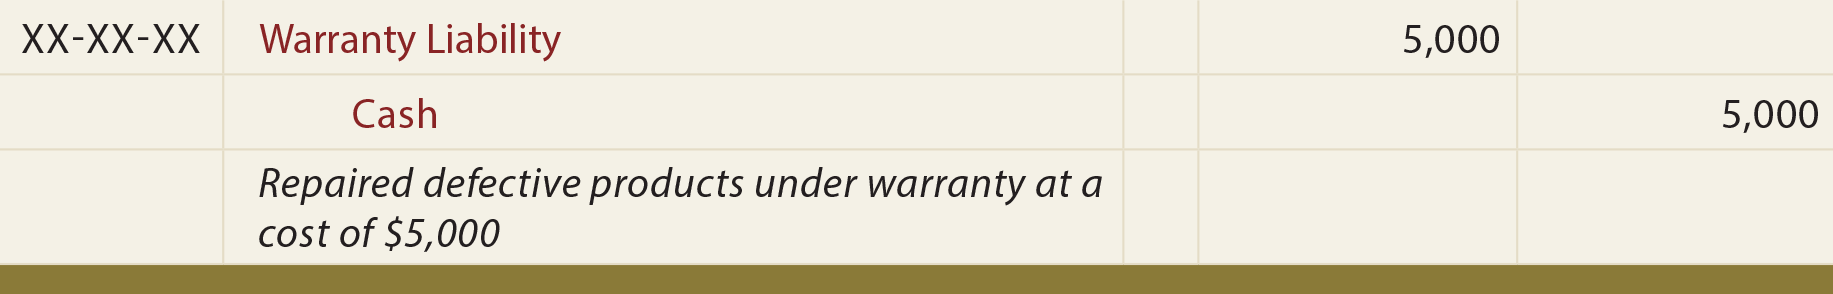 Warranty Costs General Journal Entry - Repair defective products